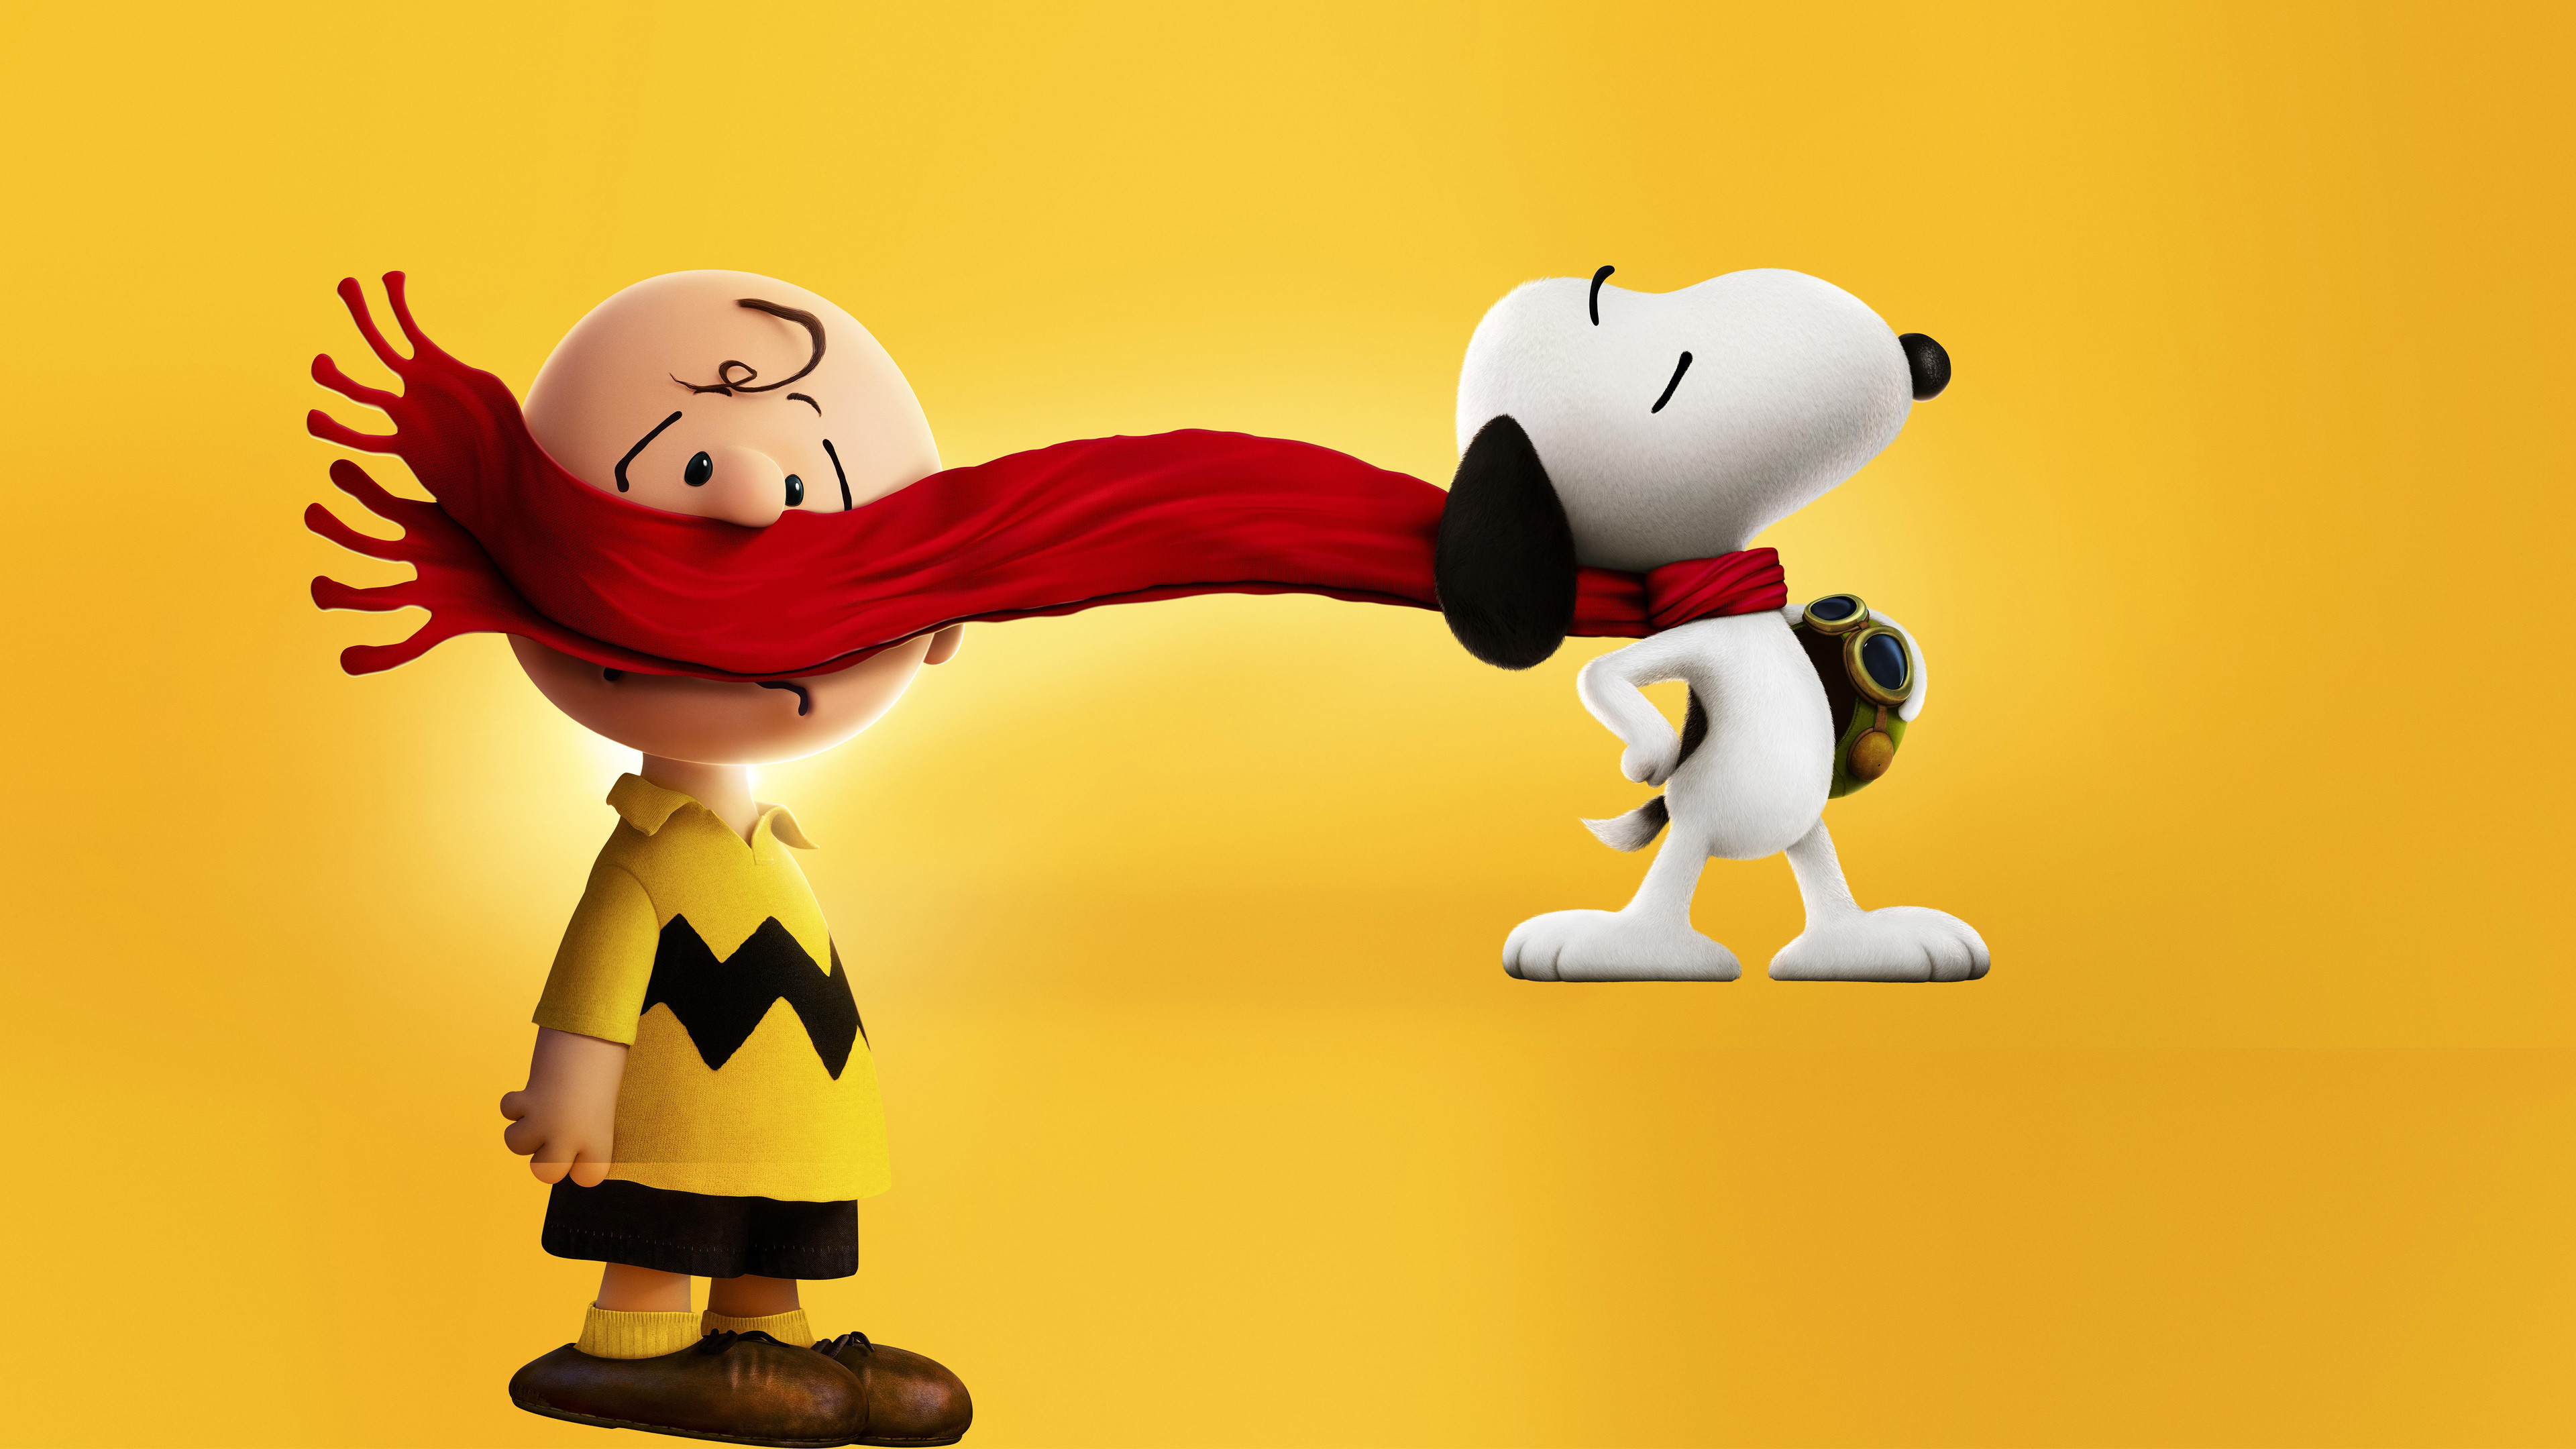 A Charlie Brown Christmas Wallpaper Cartoon Wallpapers - Snoopy With Red Scarf - HD Wallpaper 